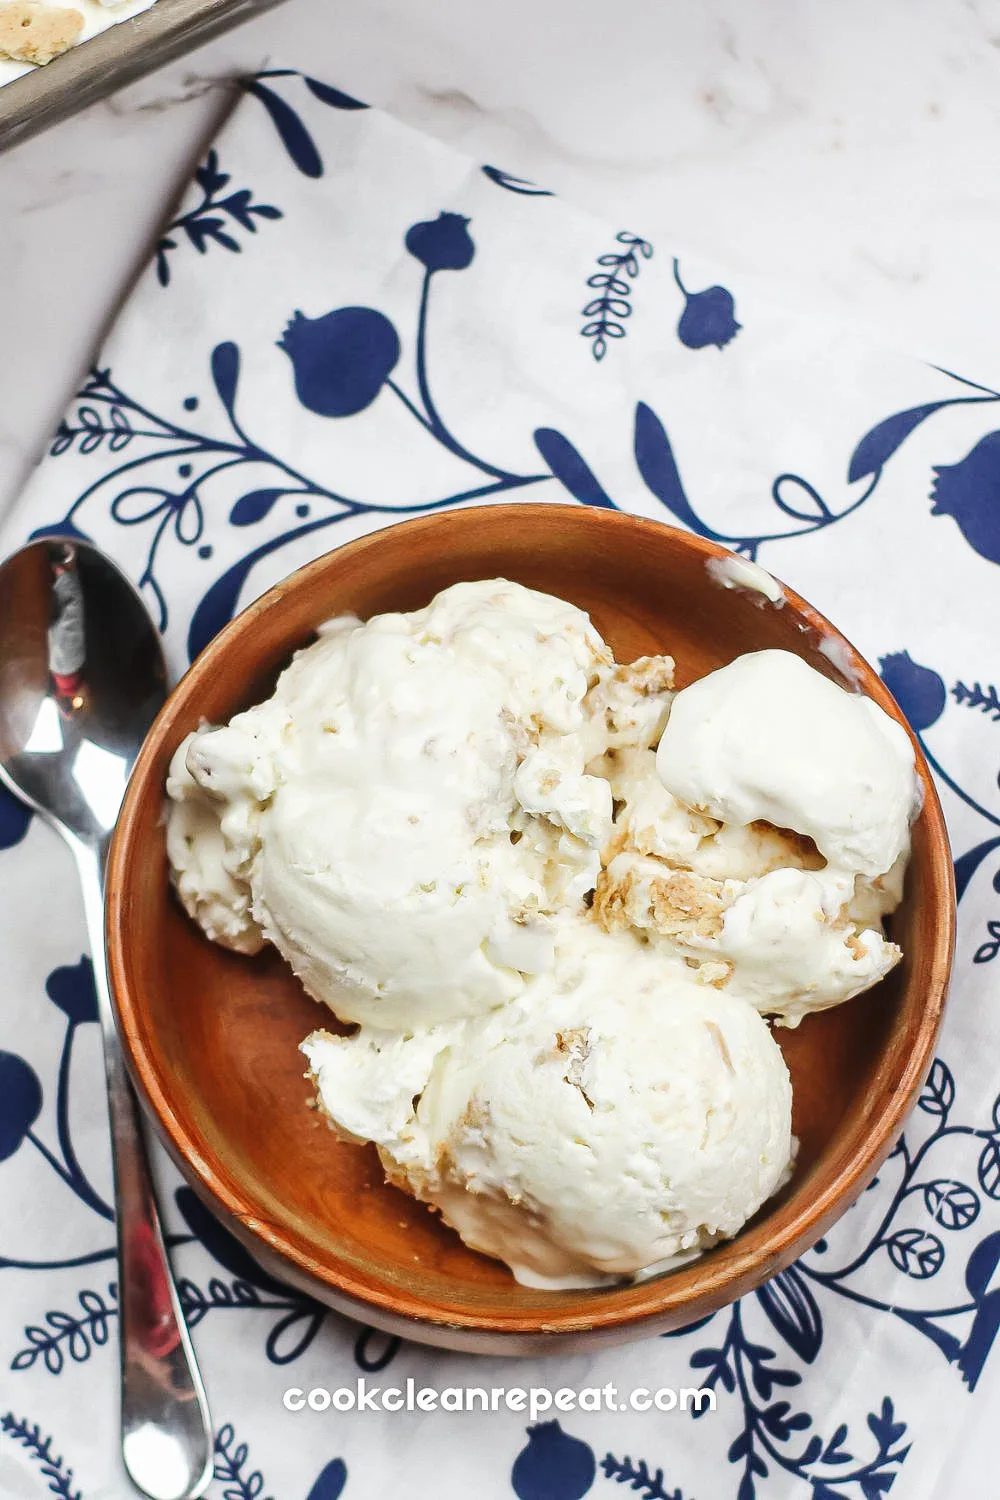 Key Lime Pie Ice Cream in a bowl on a patterned napkin